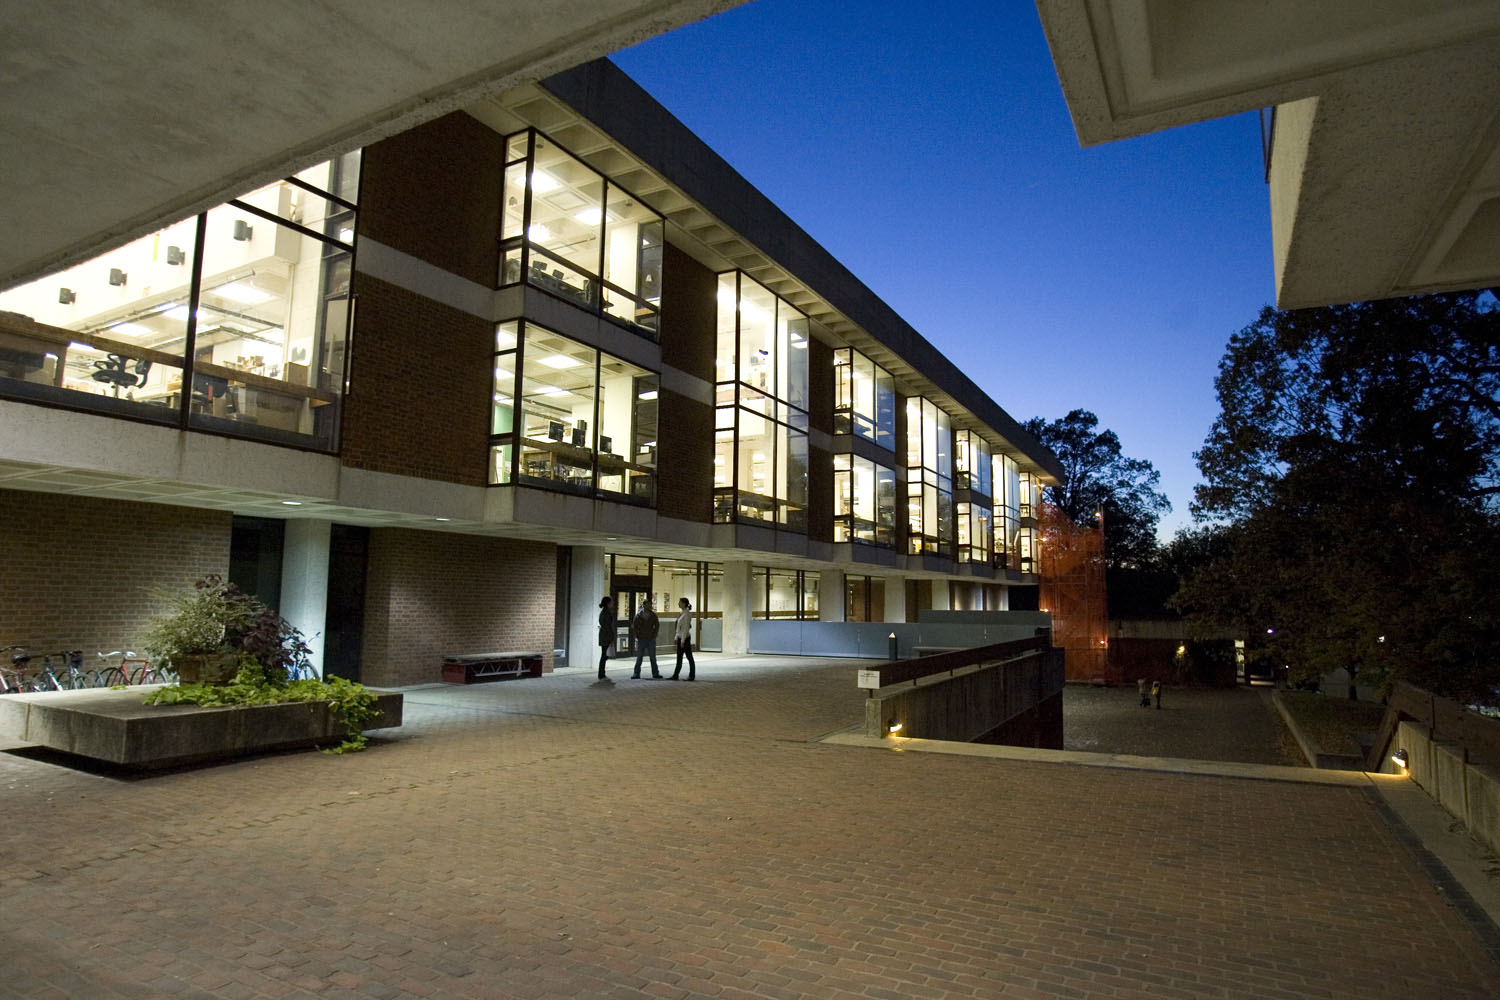 Campbell Hall at dusk with the lights shining through the windows